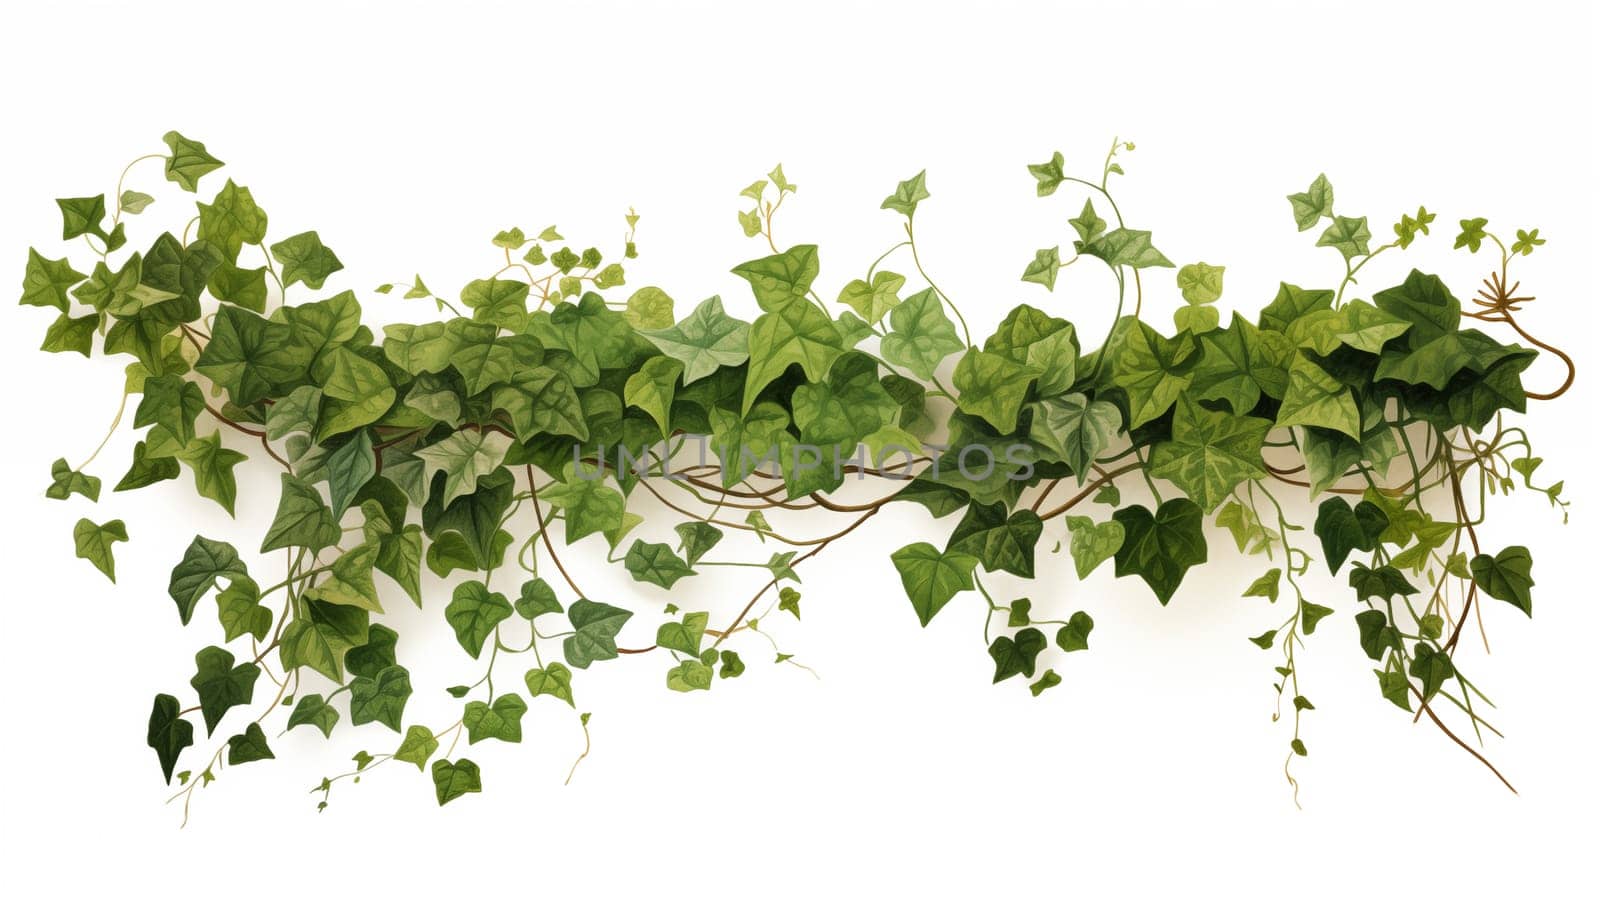 display ivy, isolated, white background. by Nadtochiy